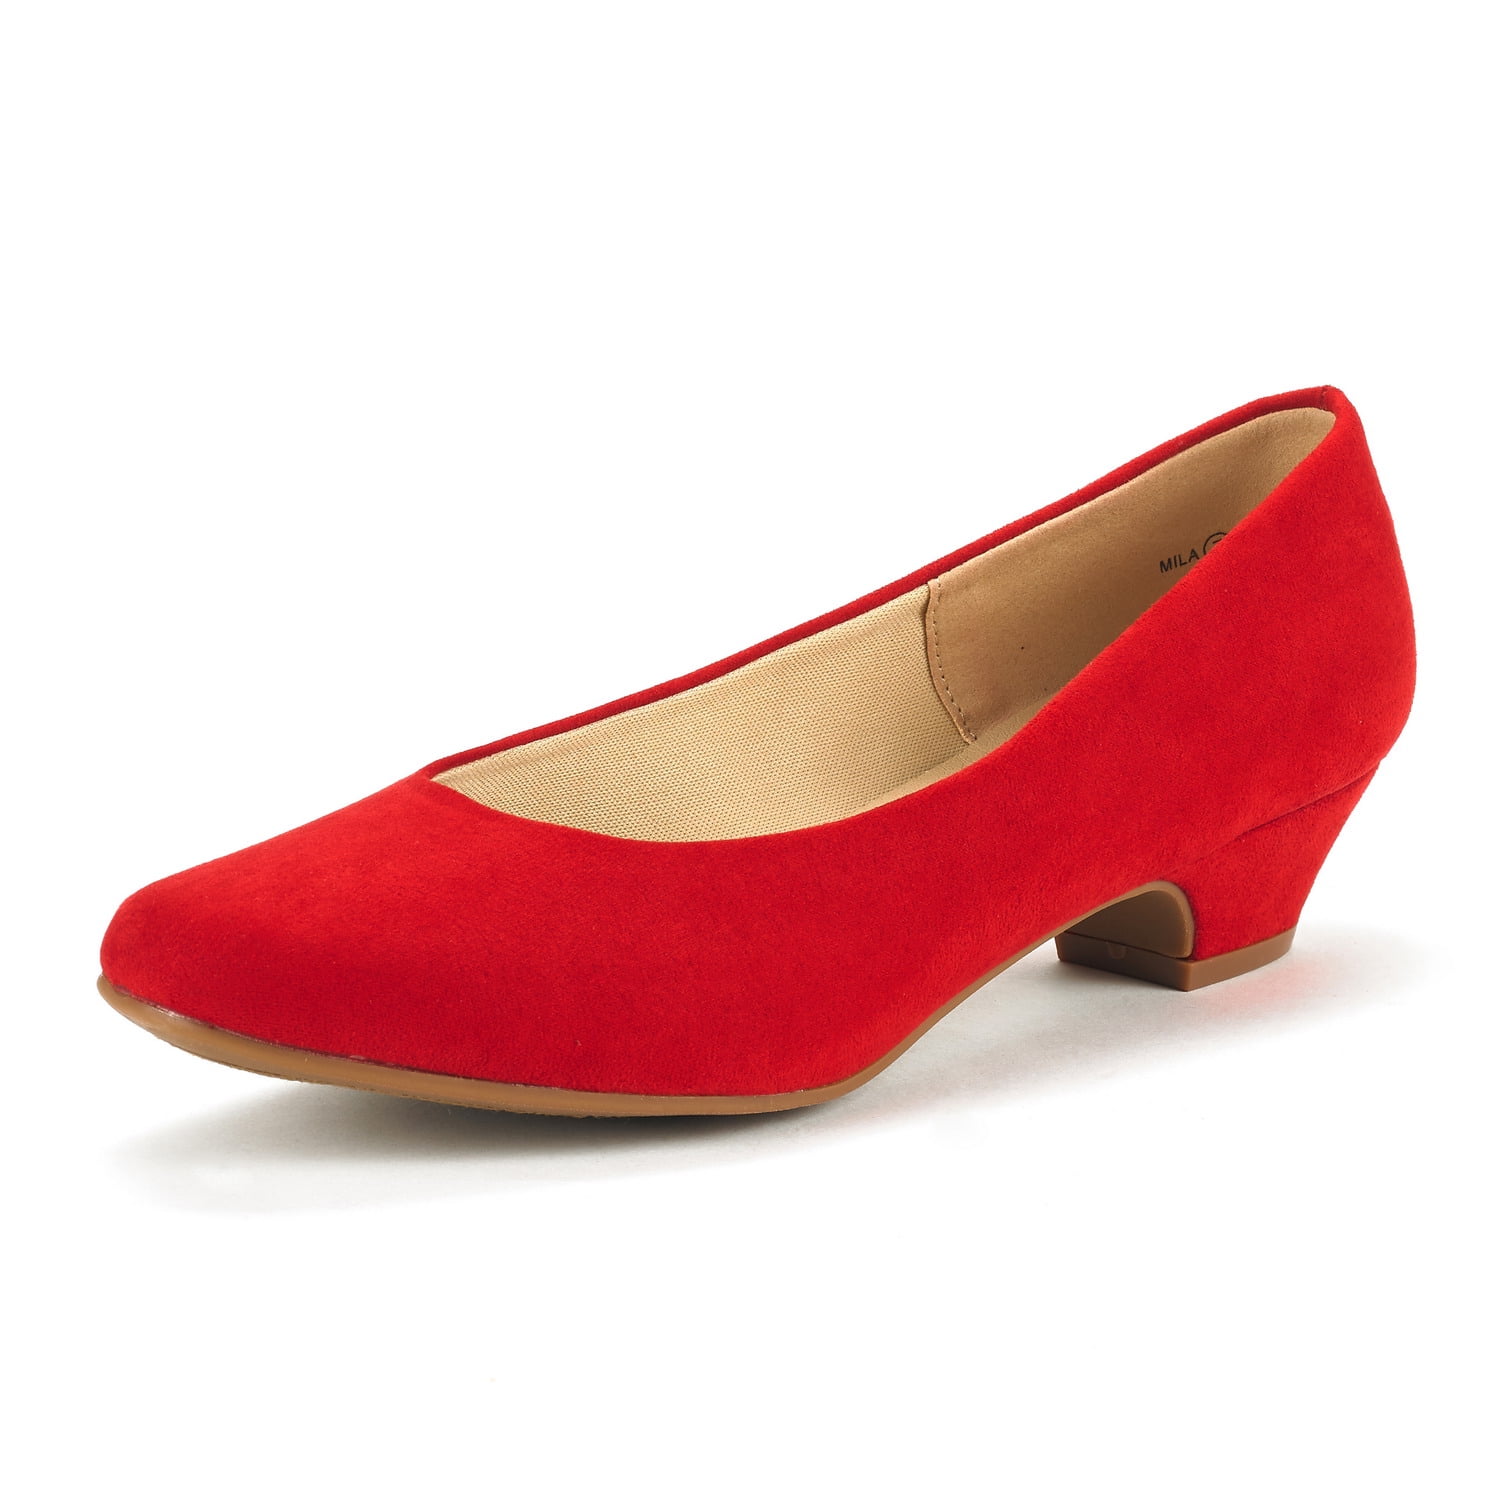 Dream Pairs Women Fashion Heel Pump Shoes Low Chunky Slip On Round Toe Shoes Comfort for Work Mila Red/Suede Size - Walmart.com